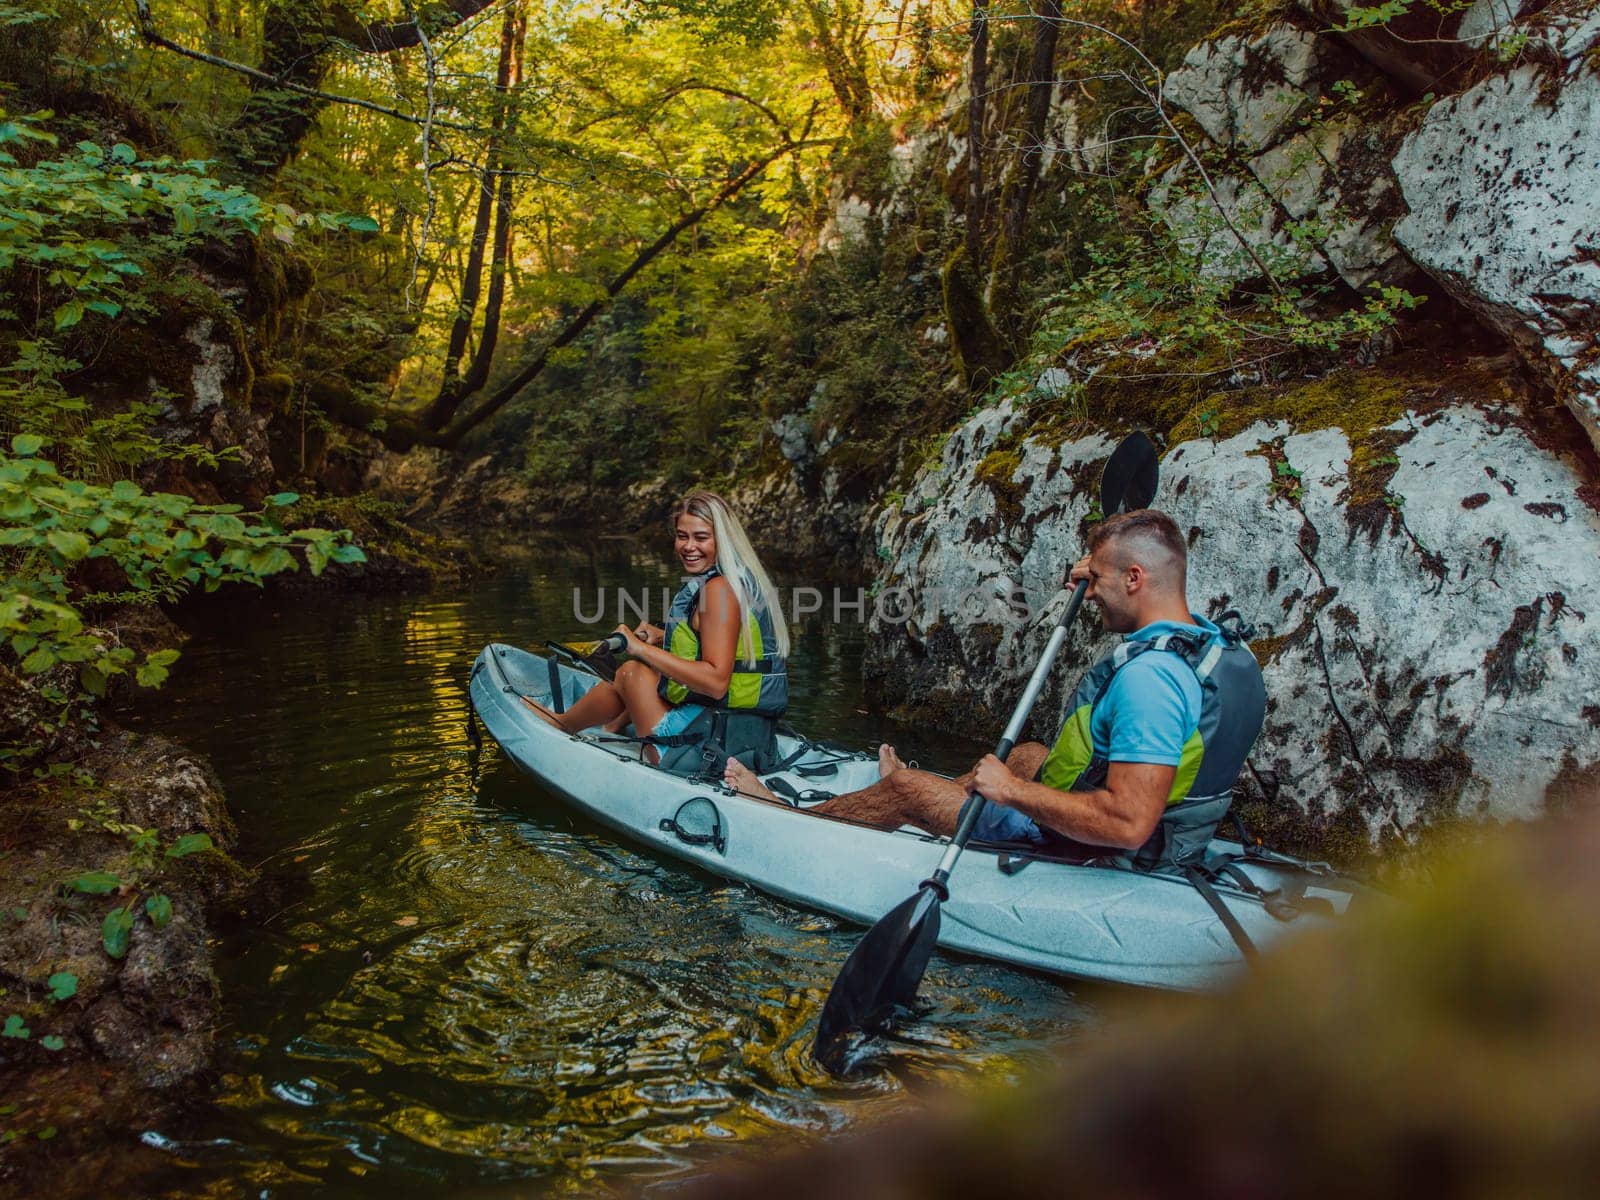 A young couple enjoying an idyllic kayak ride in the middle of a beautiful river surrounded by forest greenery by dotshock